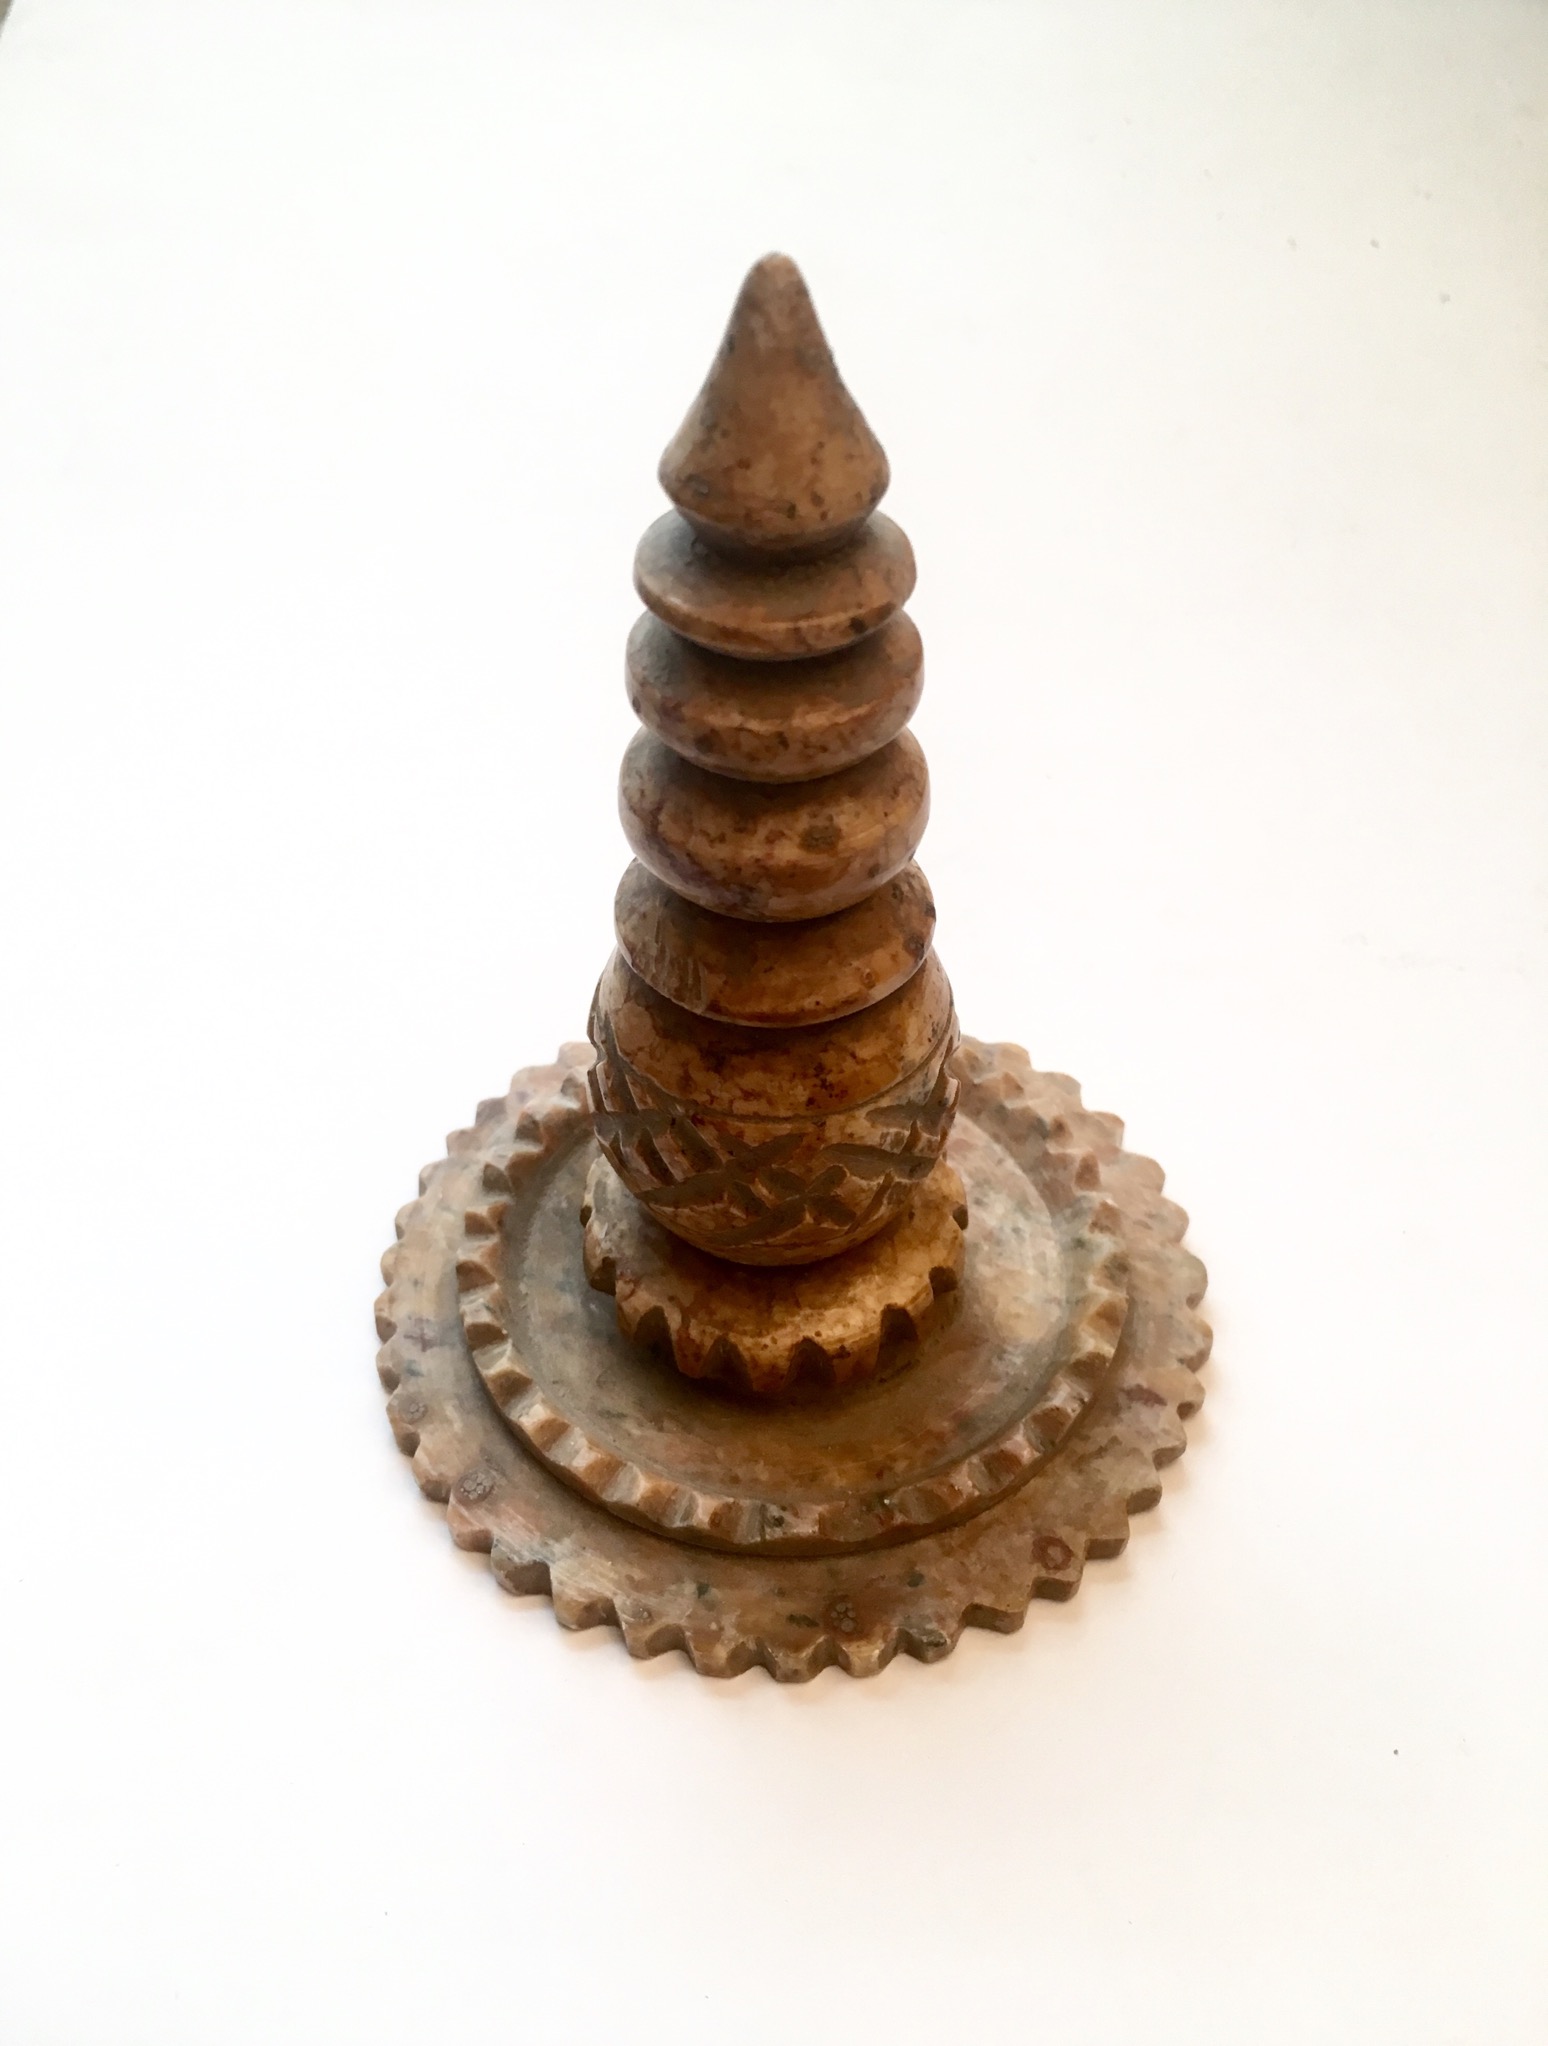 Soapstone model of a stupa, with four canopies on a dual pedestal